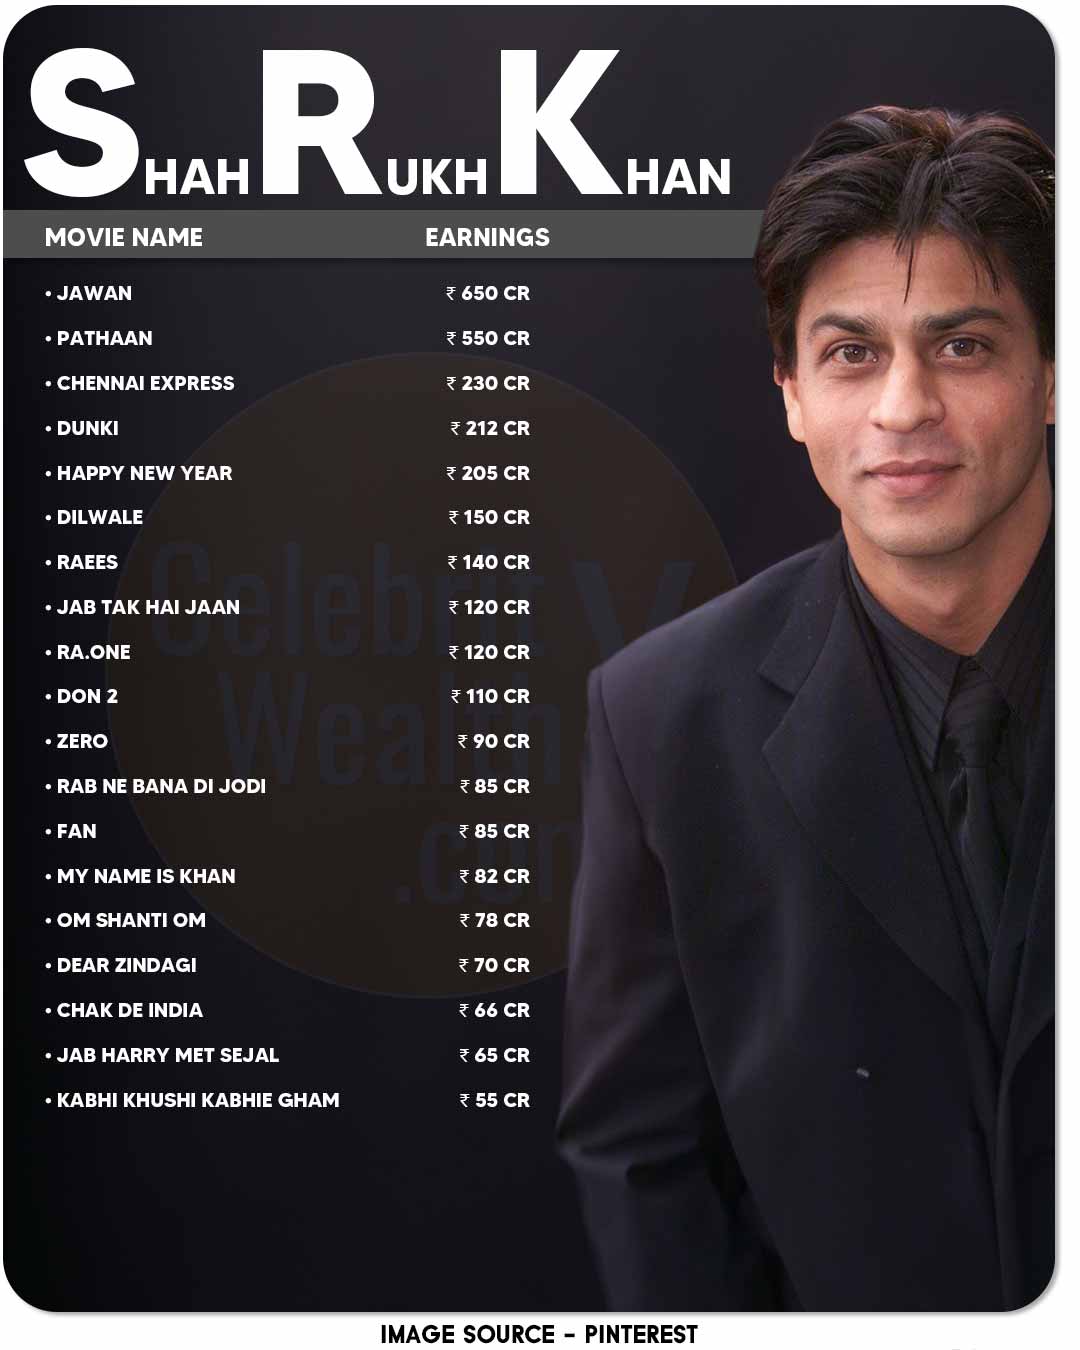 Shahrukh Khan Movies list with Earnings